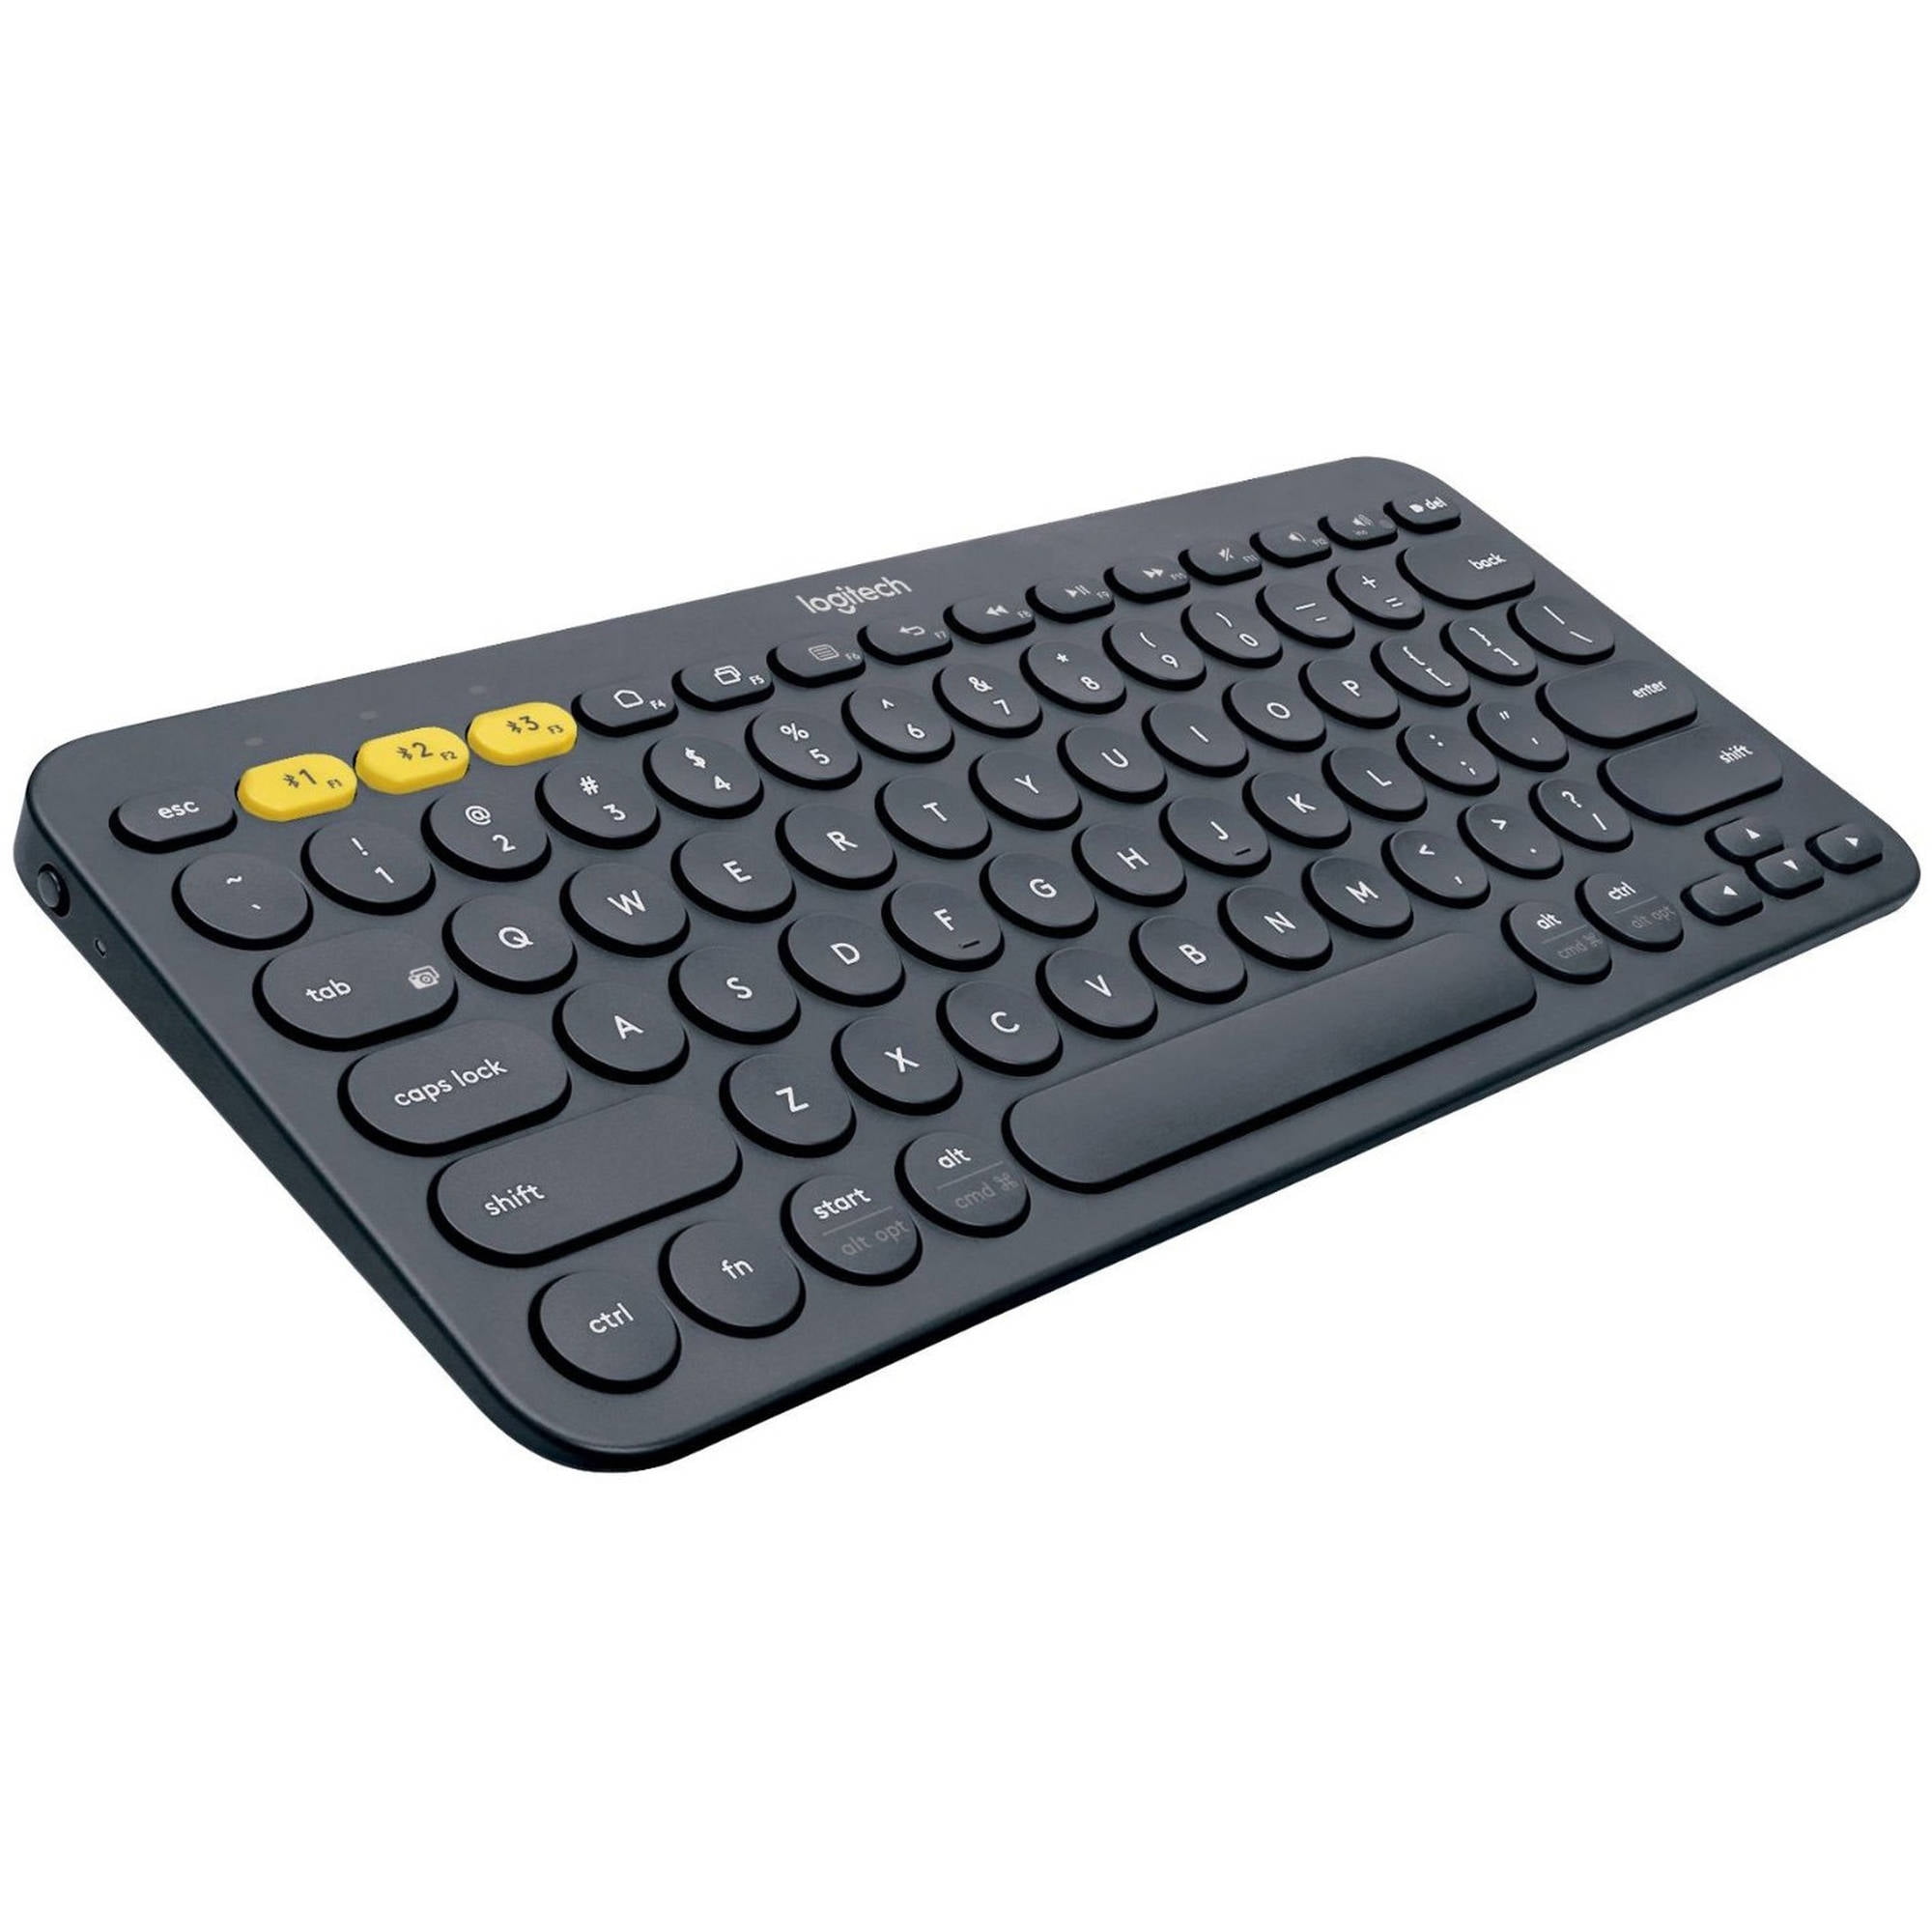 Logitech K380 Multi-Device Wireless Keyboard with Easy-Switch for Up to 3 Devices, Dark Gray Walmart.com